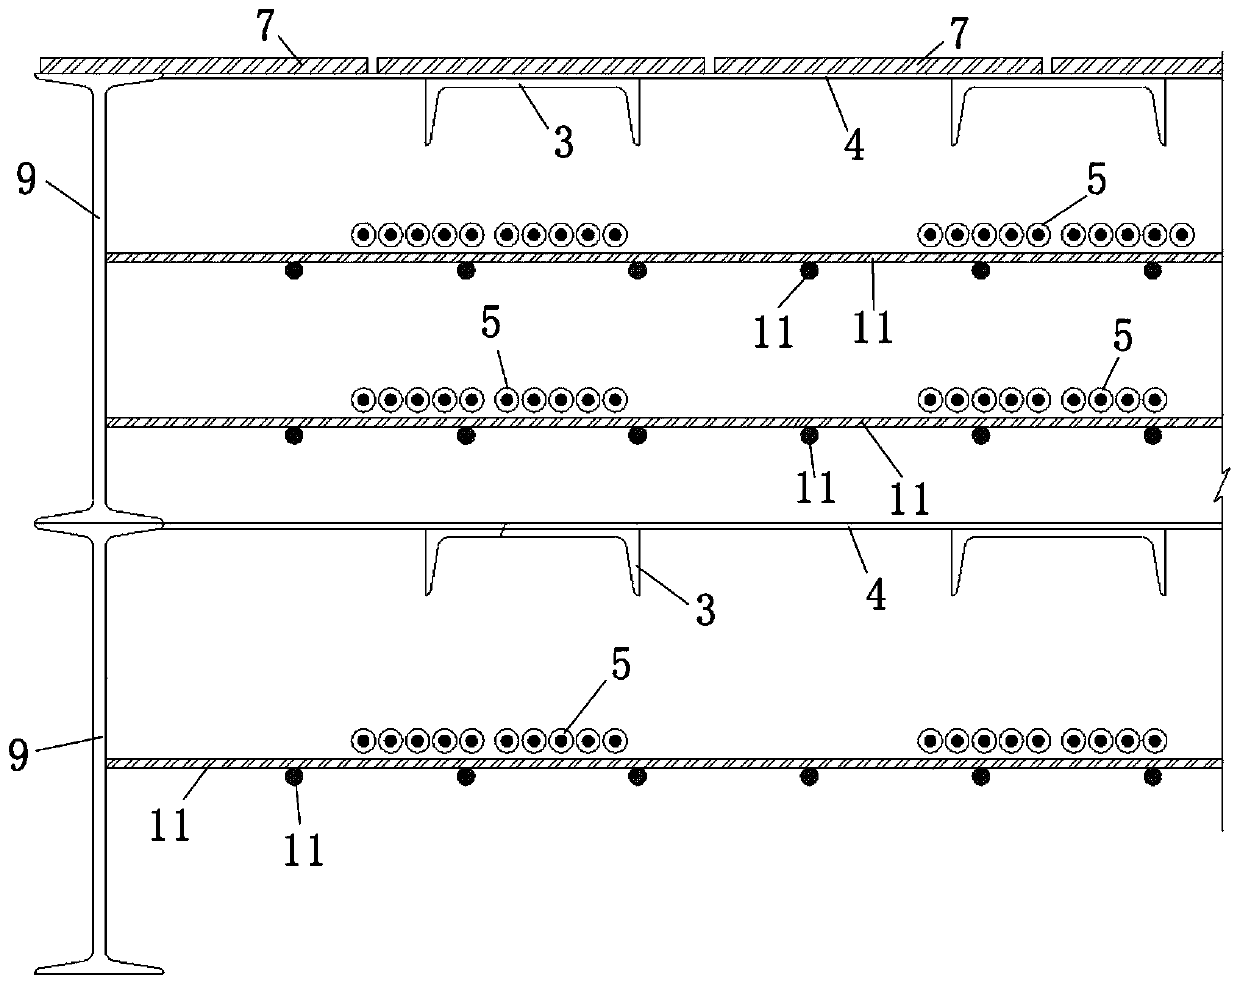 Novel plant cable interlayer structure and implementation method thereof